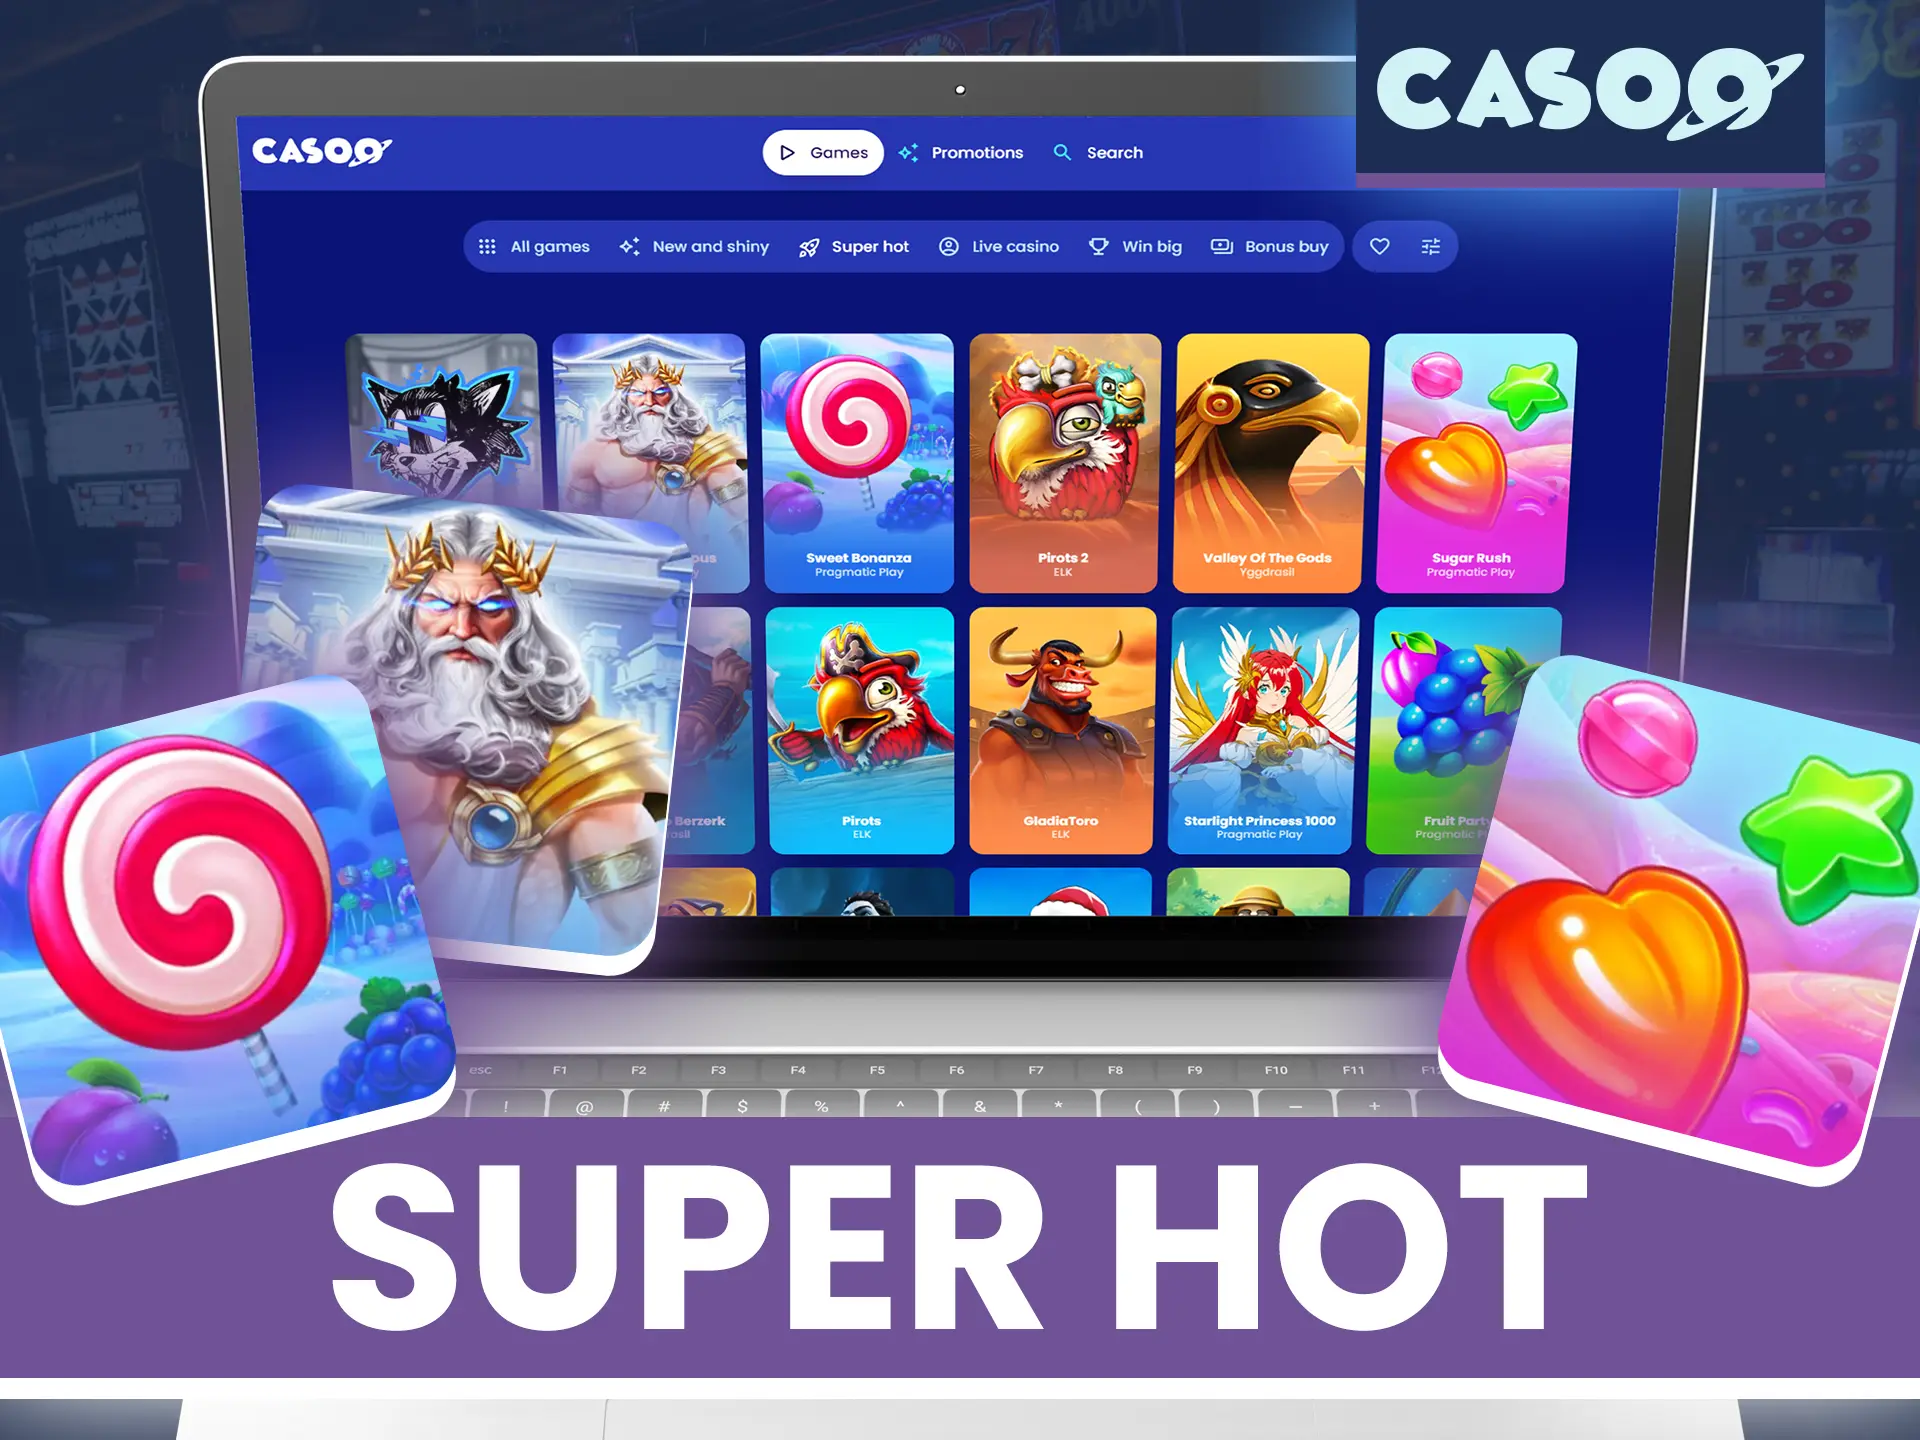 In the Super Hot section, Casoo offers the most popular games.